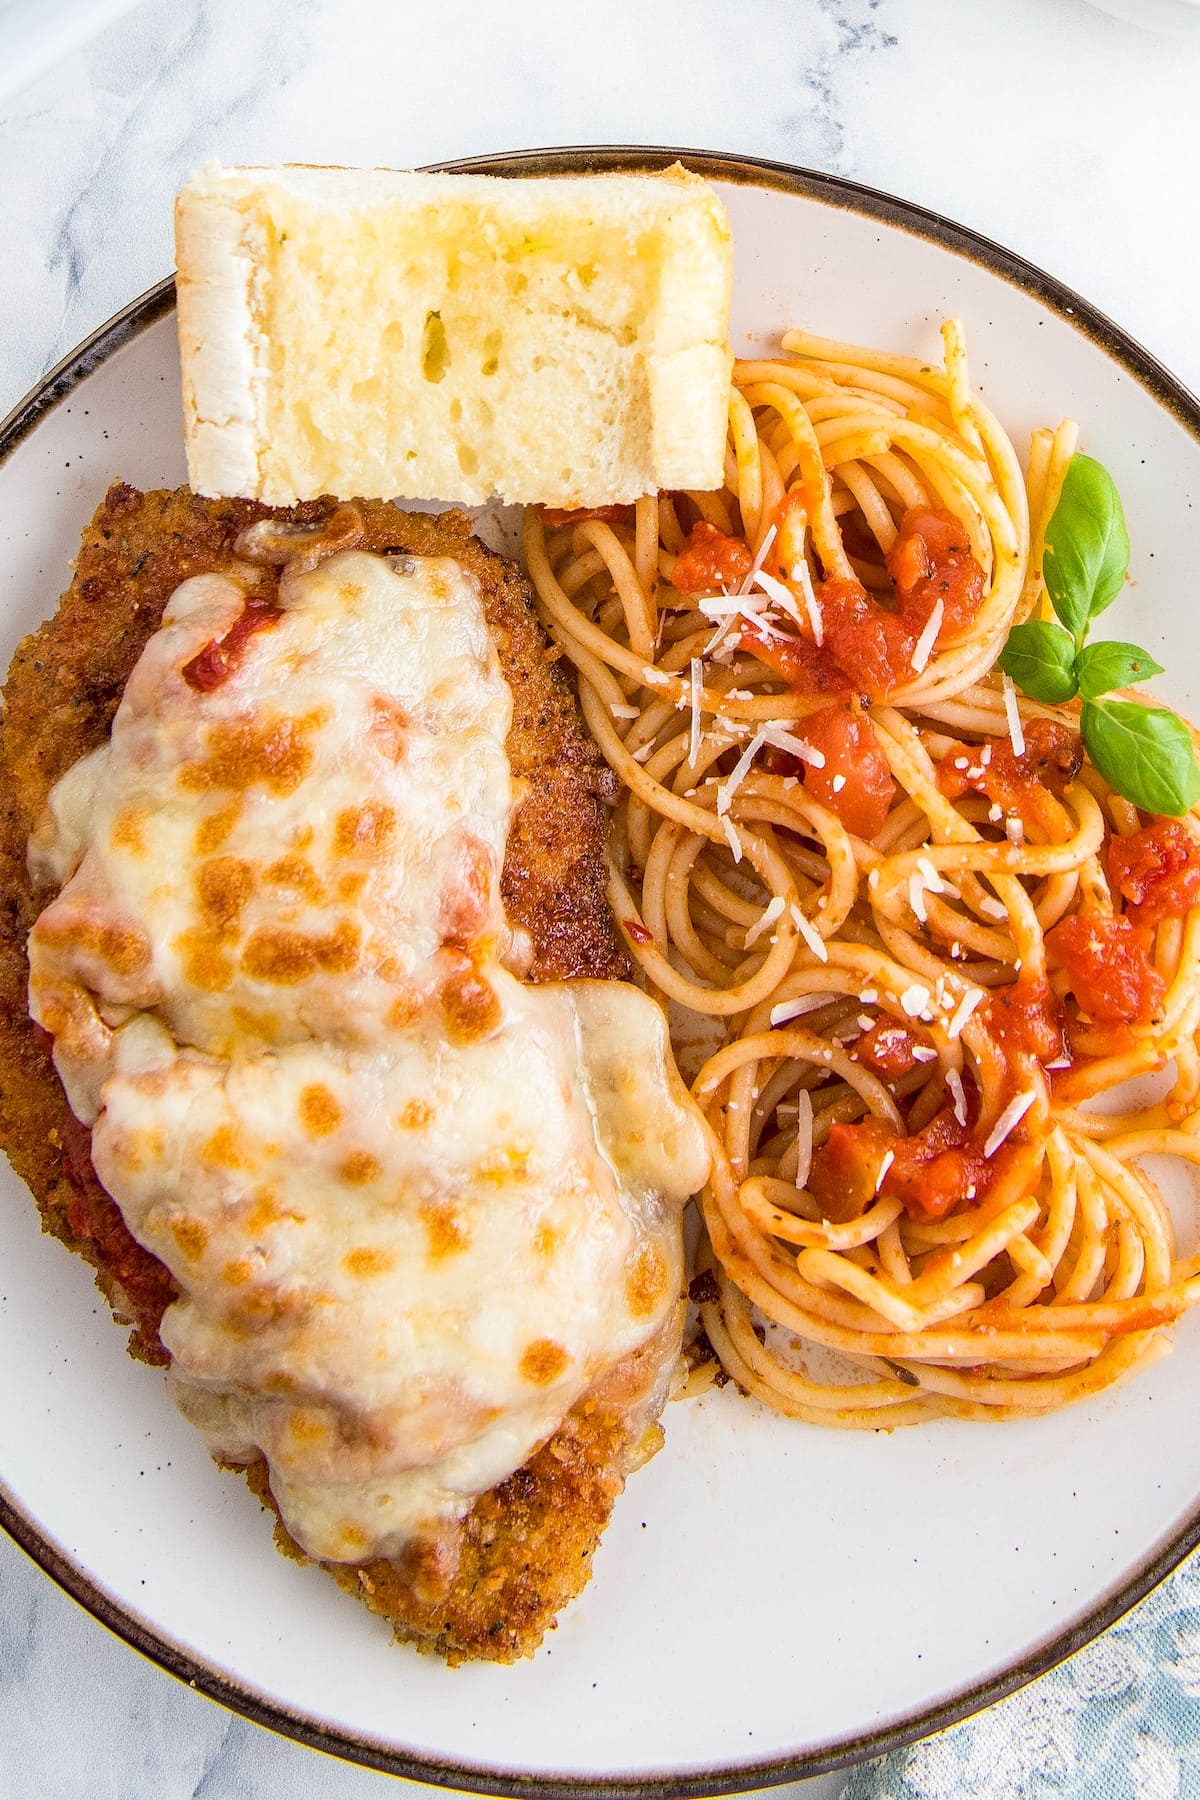 Chicken parm, spaghetti and a piece of garlic bread on a white plate.